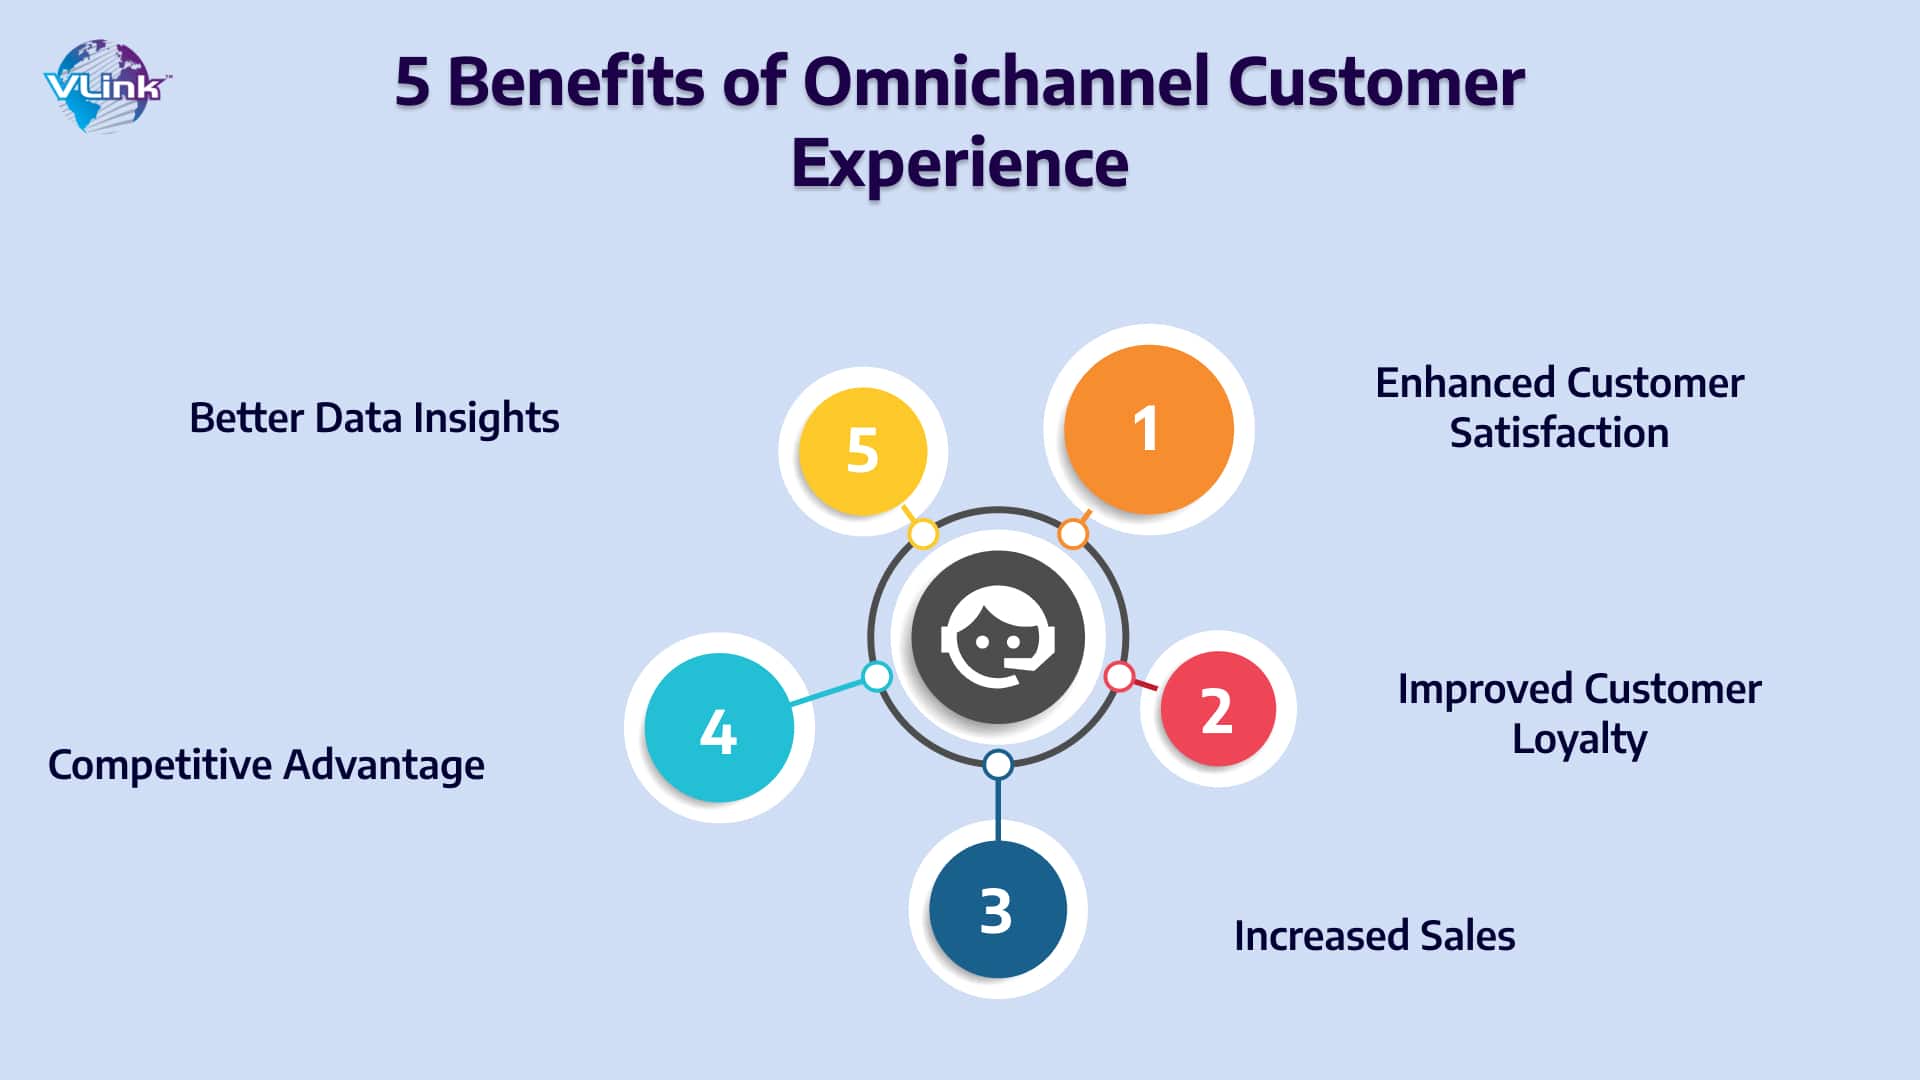 What are the Benefits of Omnichannel Customer Experience